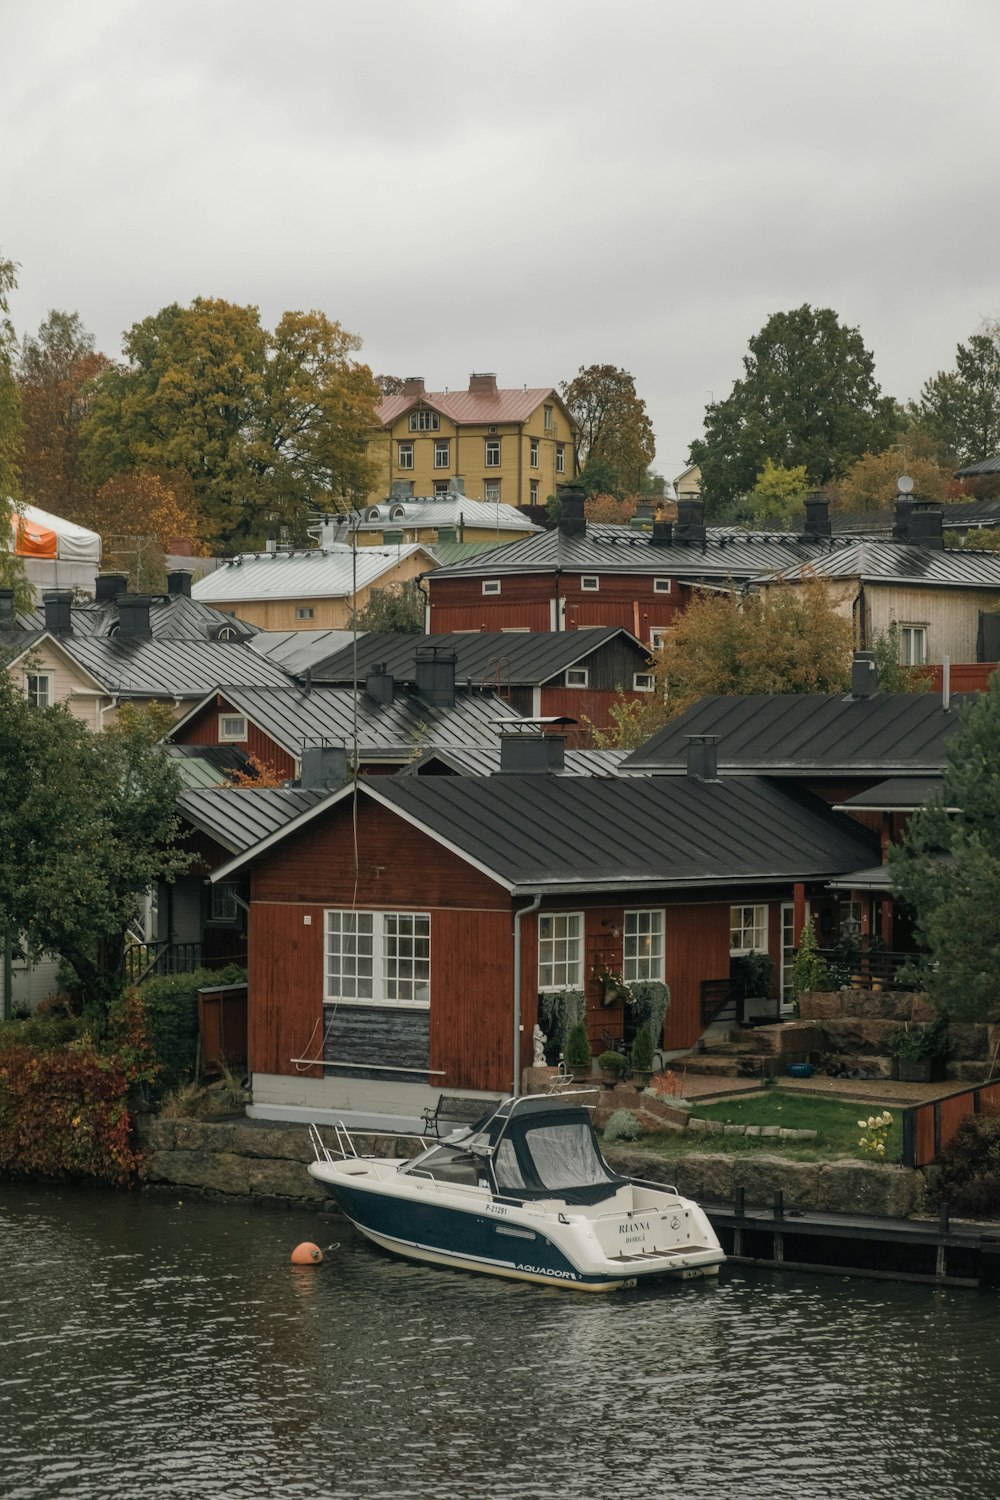 a boat in a body of water next to houses